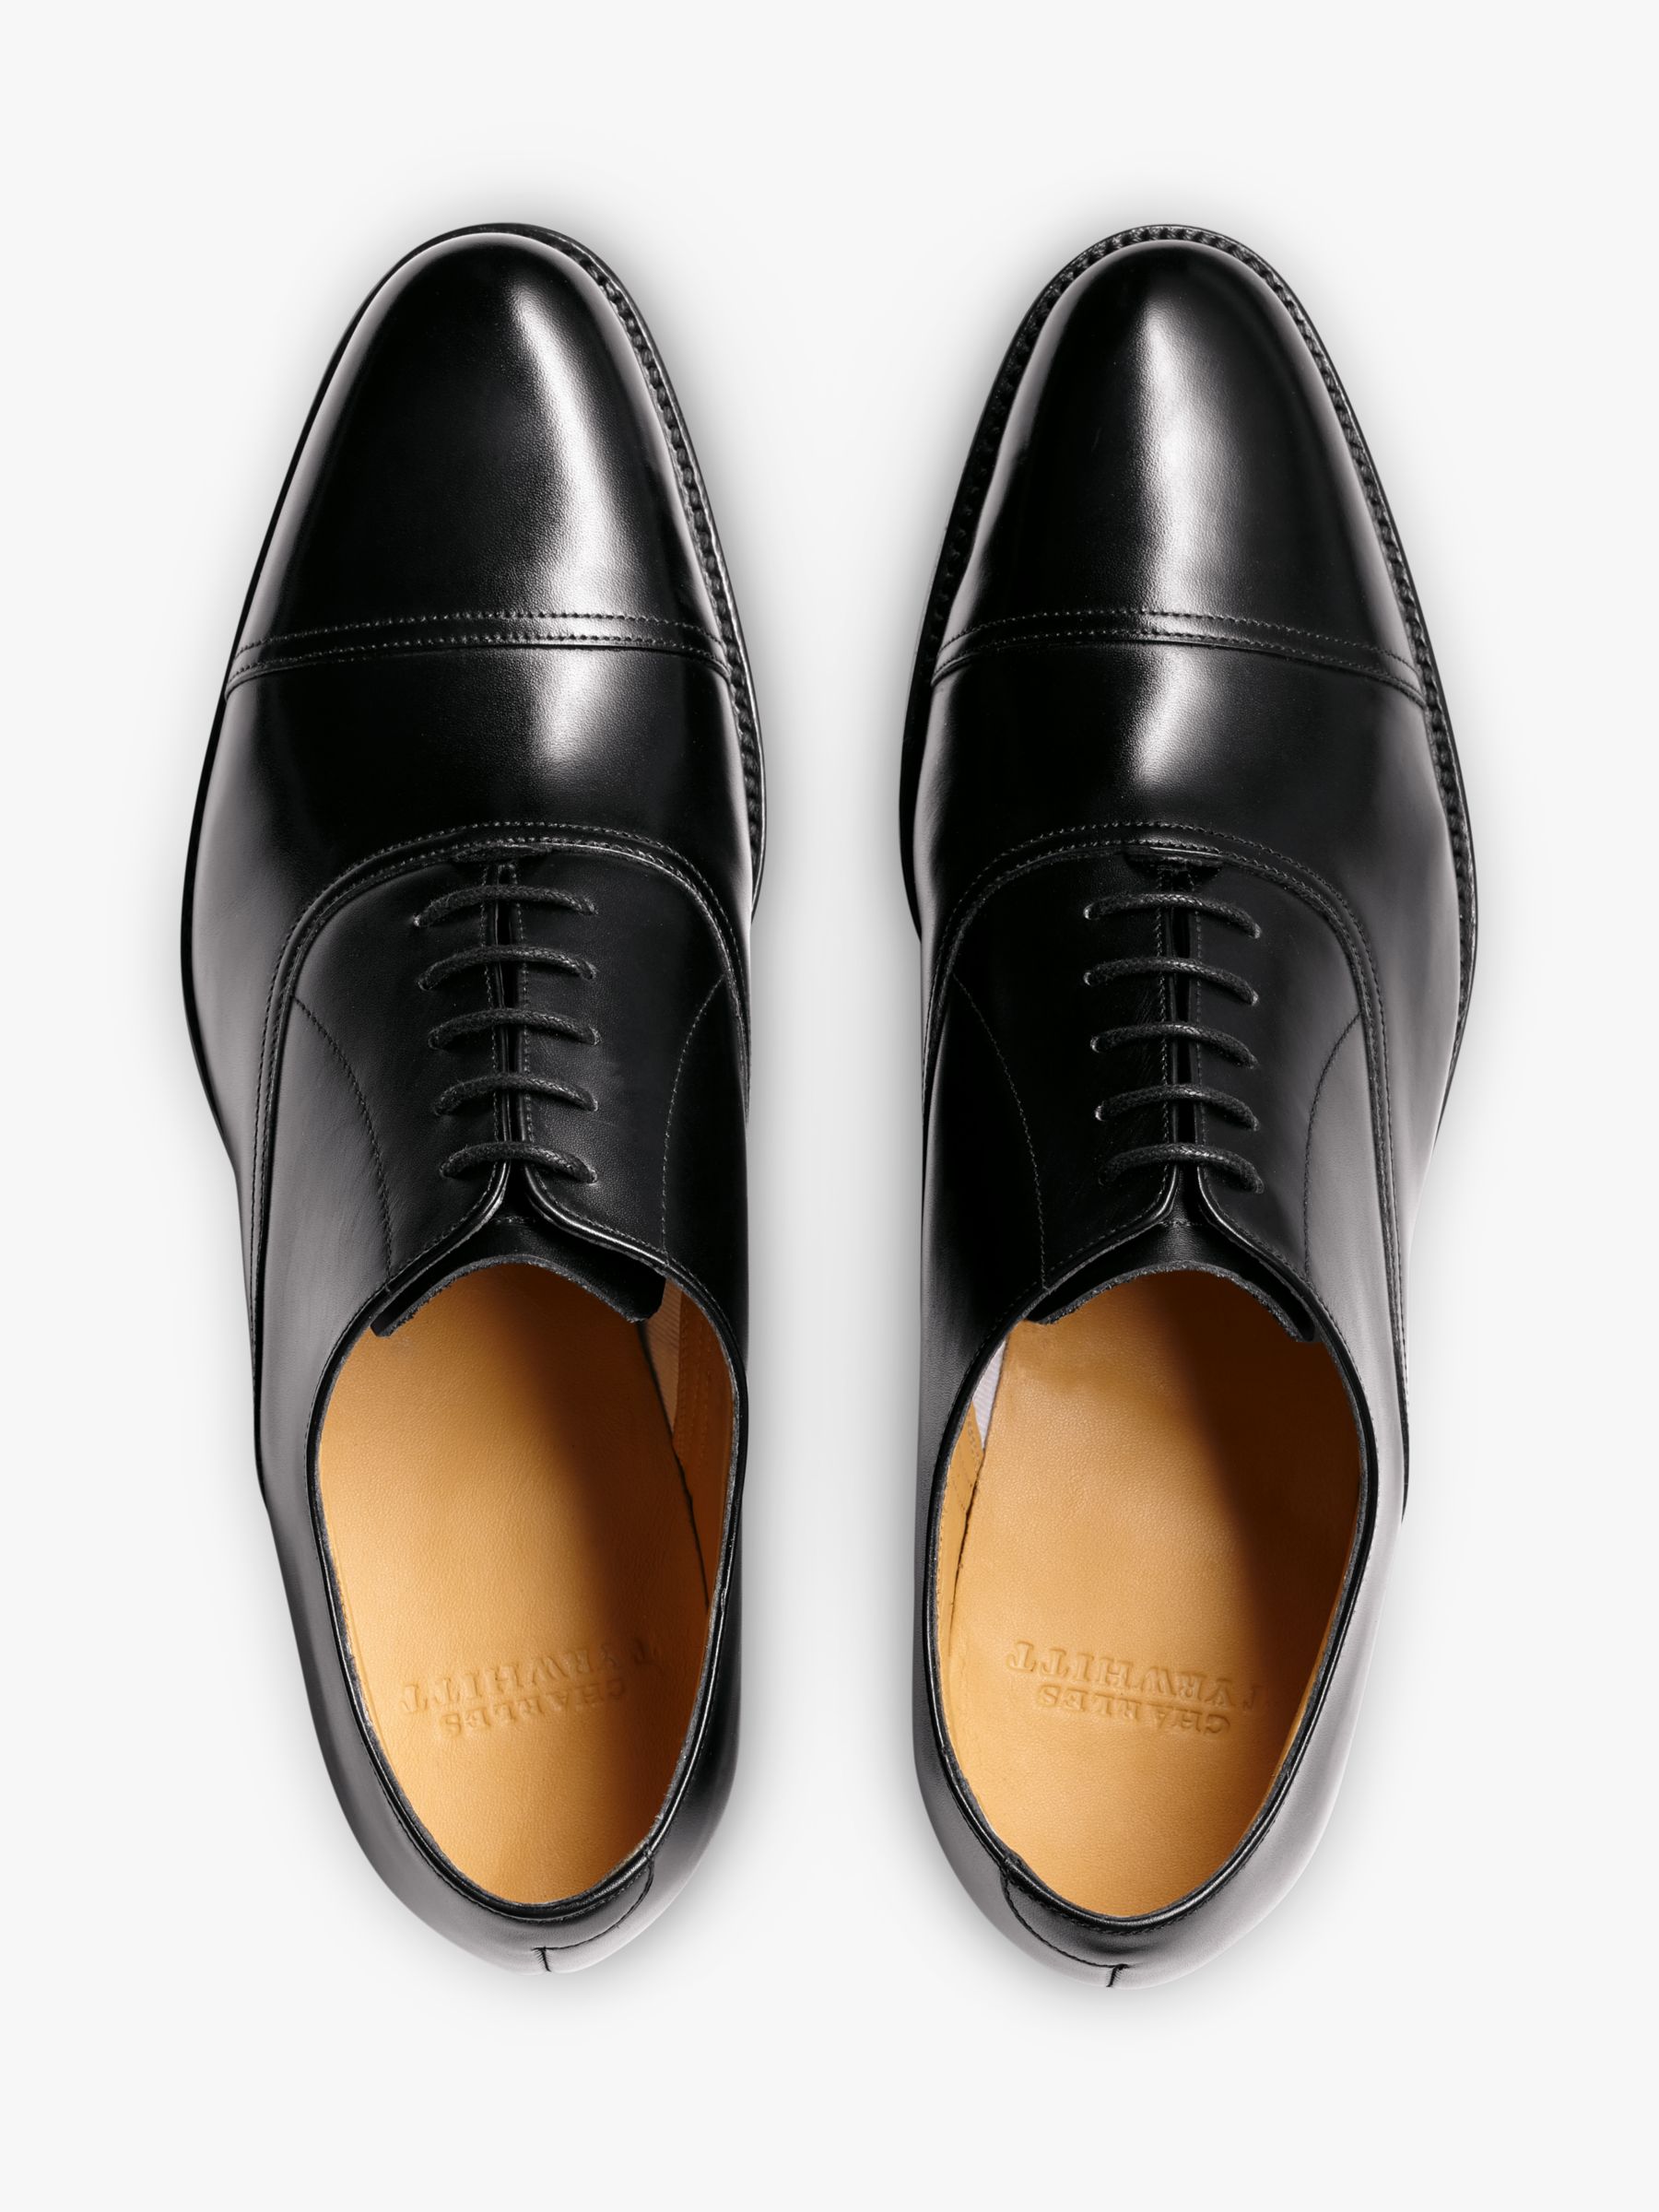 Charles Tyrwhitt Leather Oxford Shoes, Black at John Lewis & Partners